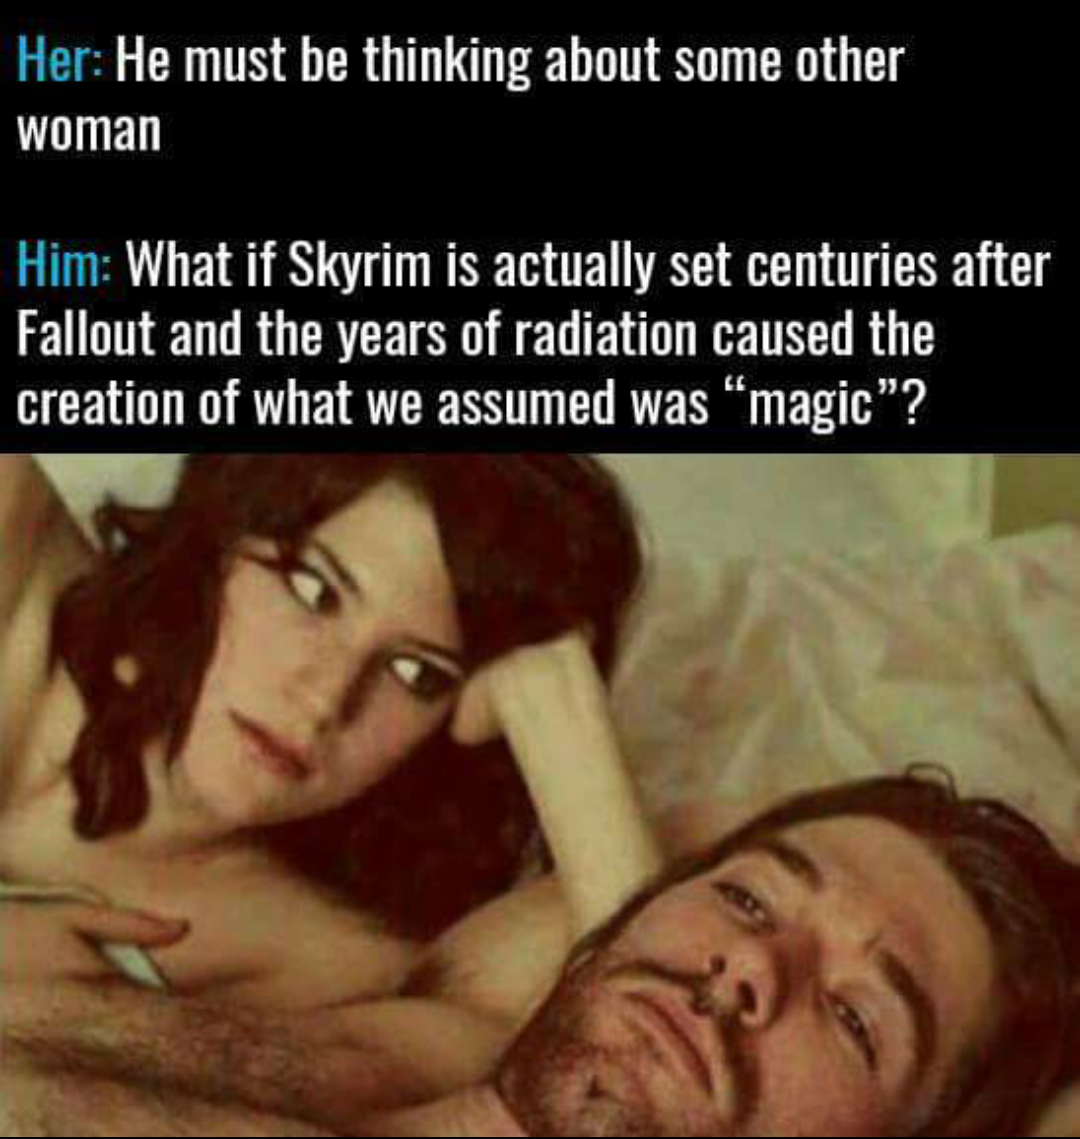 couple in bed meme thinking - Her He must be thinking about some other woman Him What if Skyrim is actually set centuries after Fallout and the years of radiation caused the creation of what we assumed was magic"?